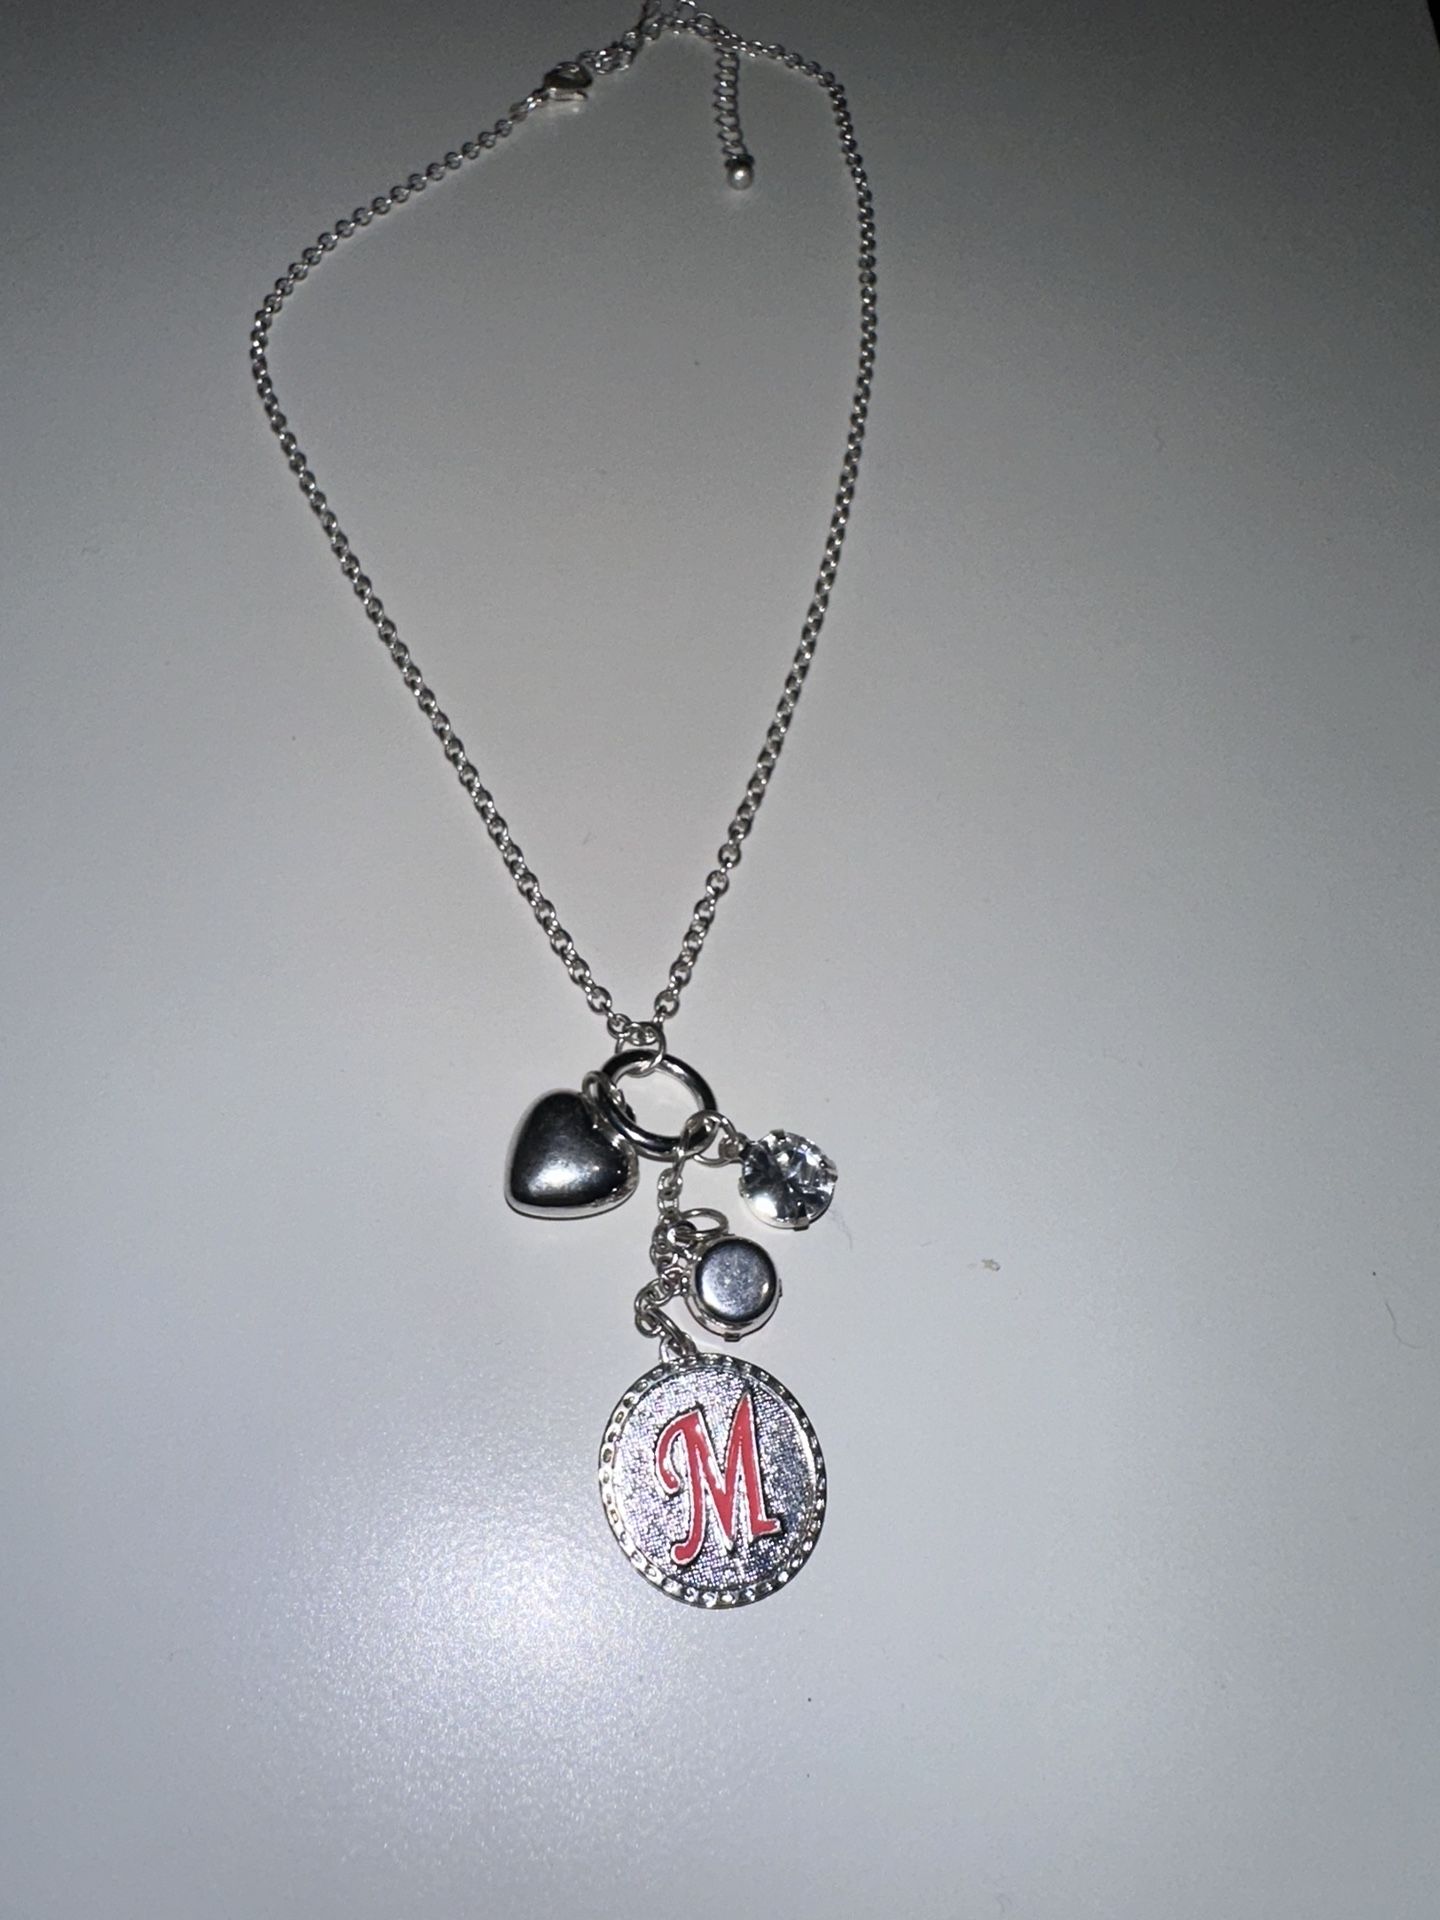 Charm Necklace For Kids/Teens